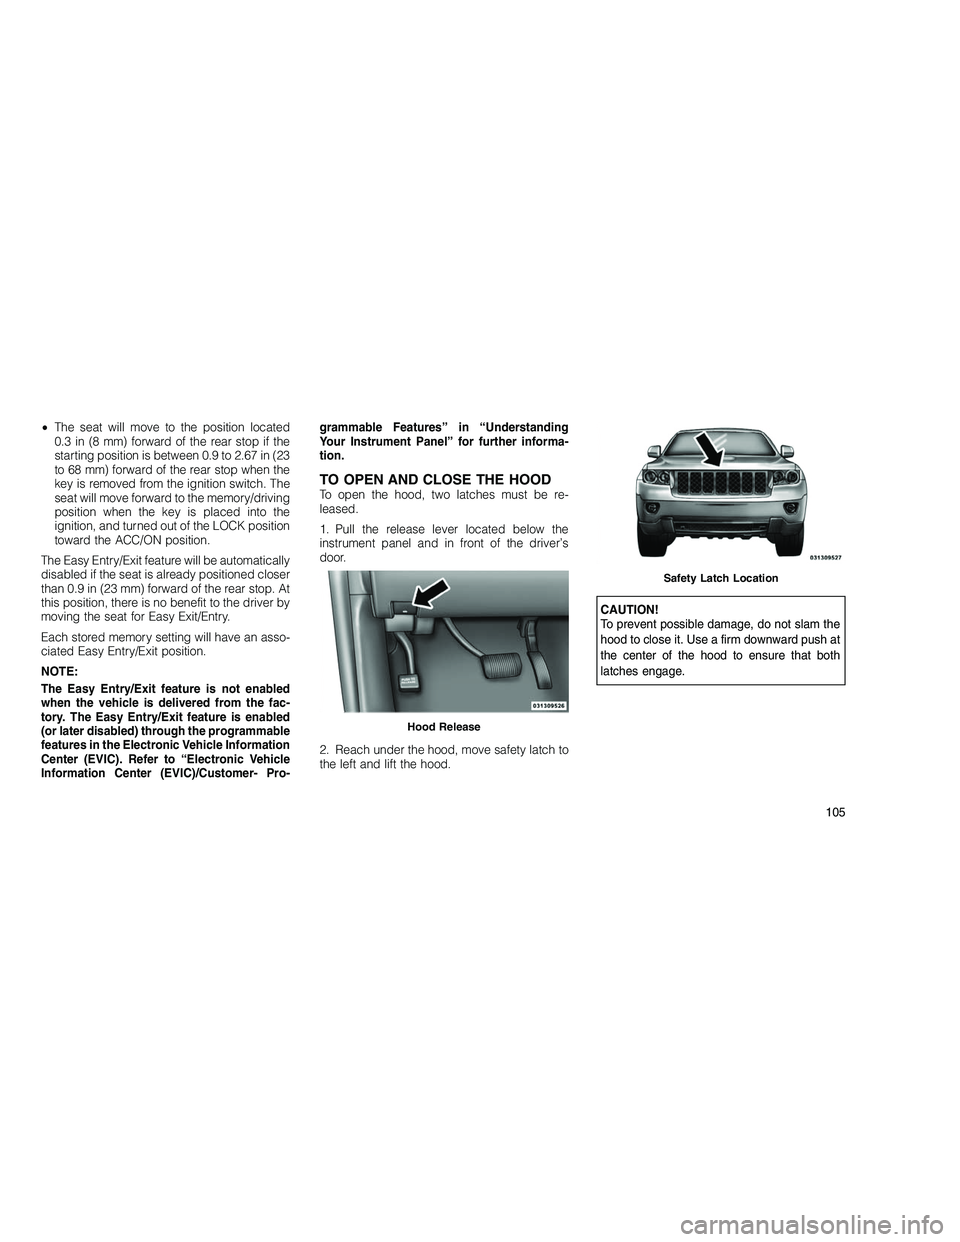 JEEP GRAND CHEROKEE 2010  Owner handbook (in English) 
•The seat will move to the position located
0.3 in (8 mm) forward of the rear stop if the
starting position is between 0.9 to 2.67 in (23
to 68 mm) forward of the rear stop when the
key is removed 